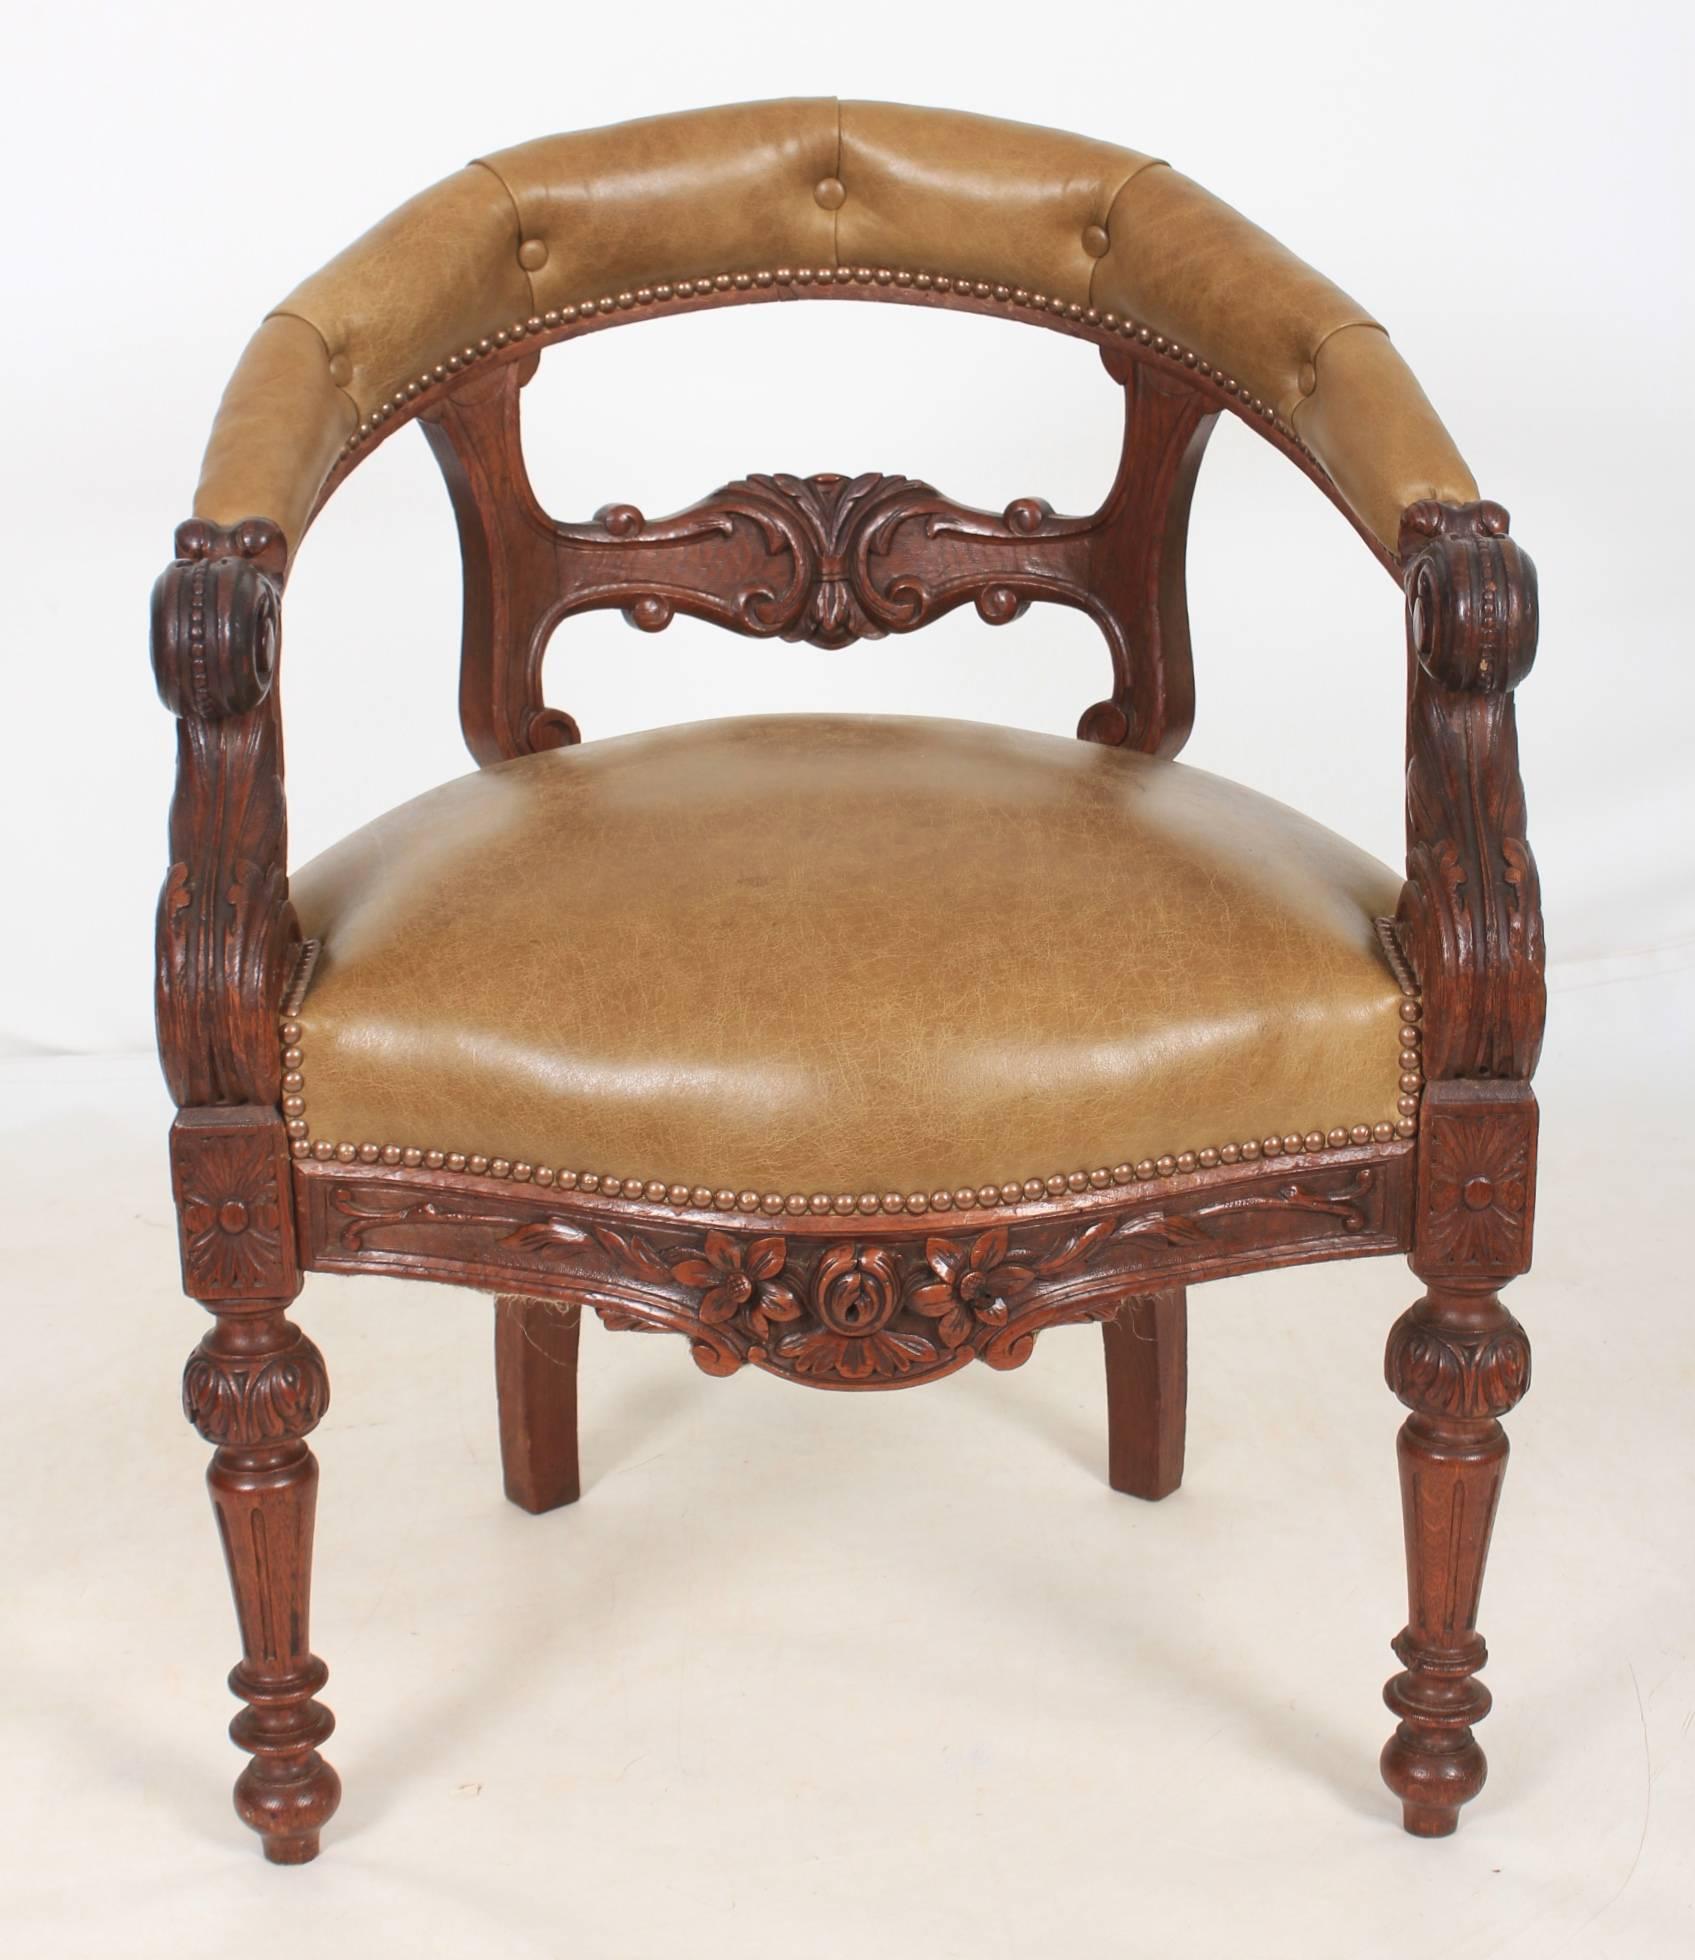 French, circa 1880.
A gorgeous French oak desk chair in good condition. Beautifully carved to a high standard, with leather upholstered and buttoned back rest and smooth leather seat with brass studded trim.
On lovely fluted legs.
This is not